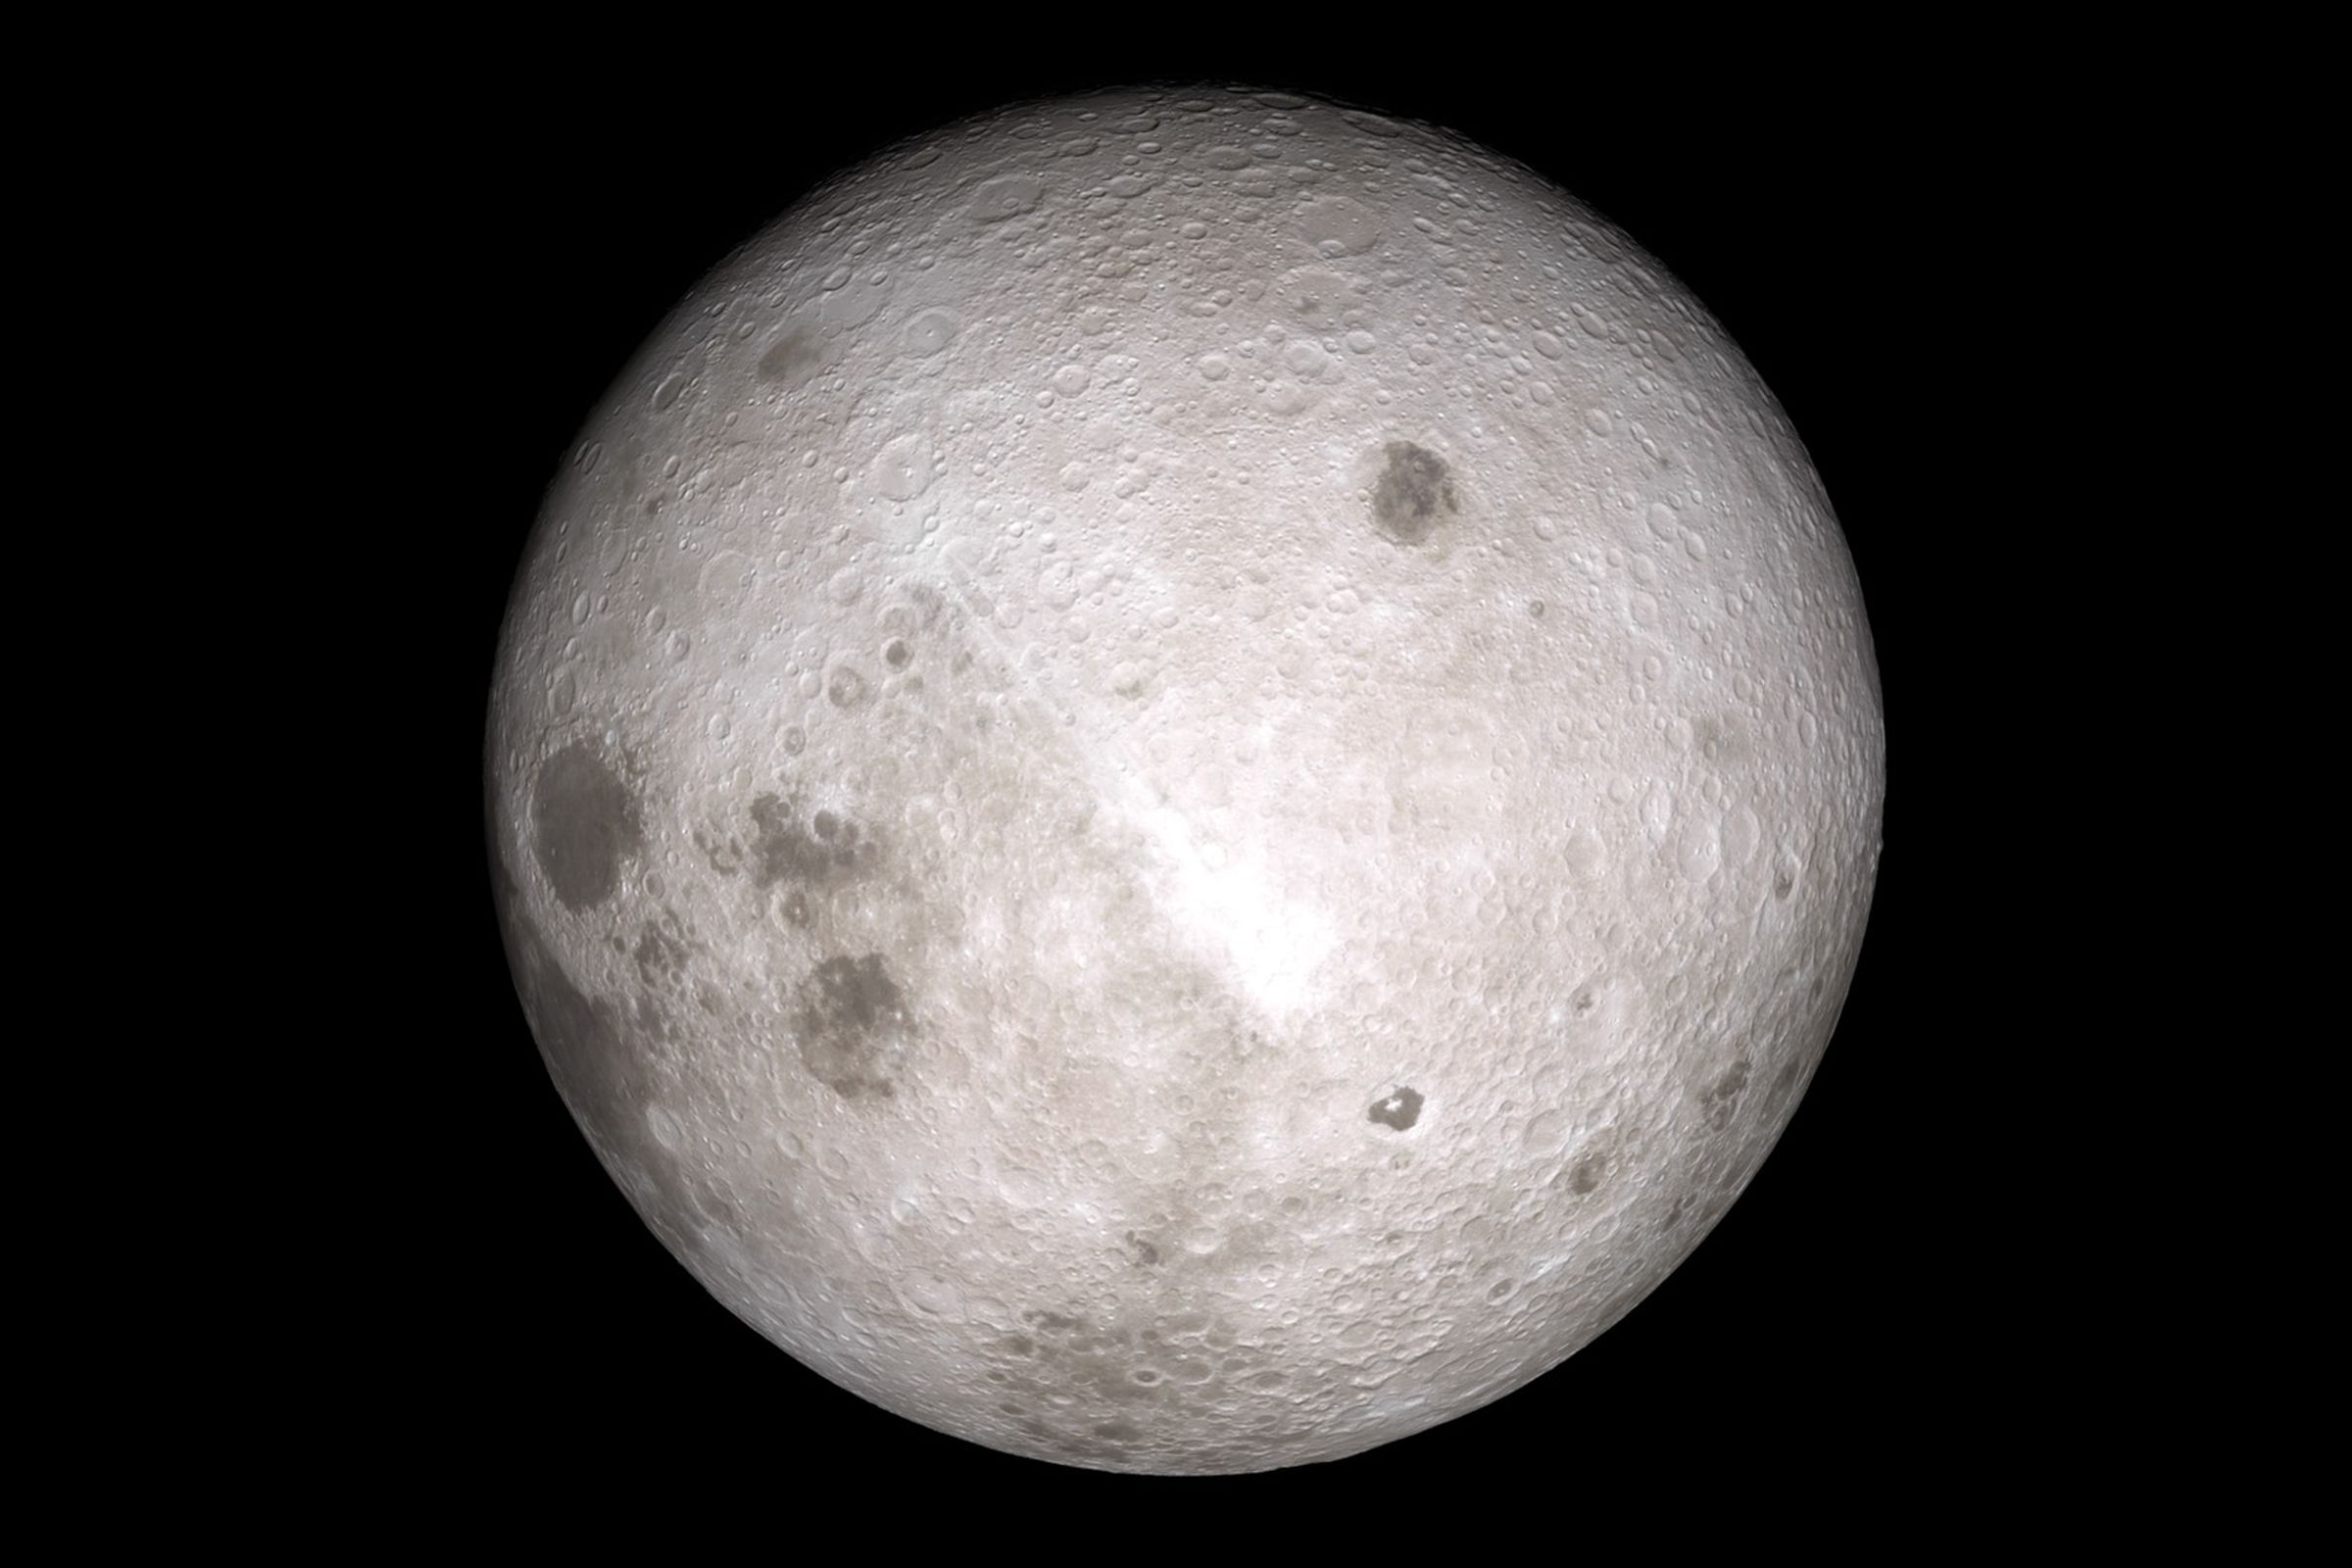 A composite image of the Moon from NASA’s Lunar Reconnaissance Orbiter, 2009.